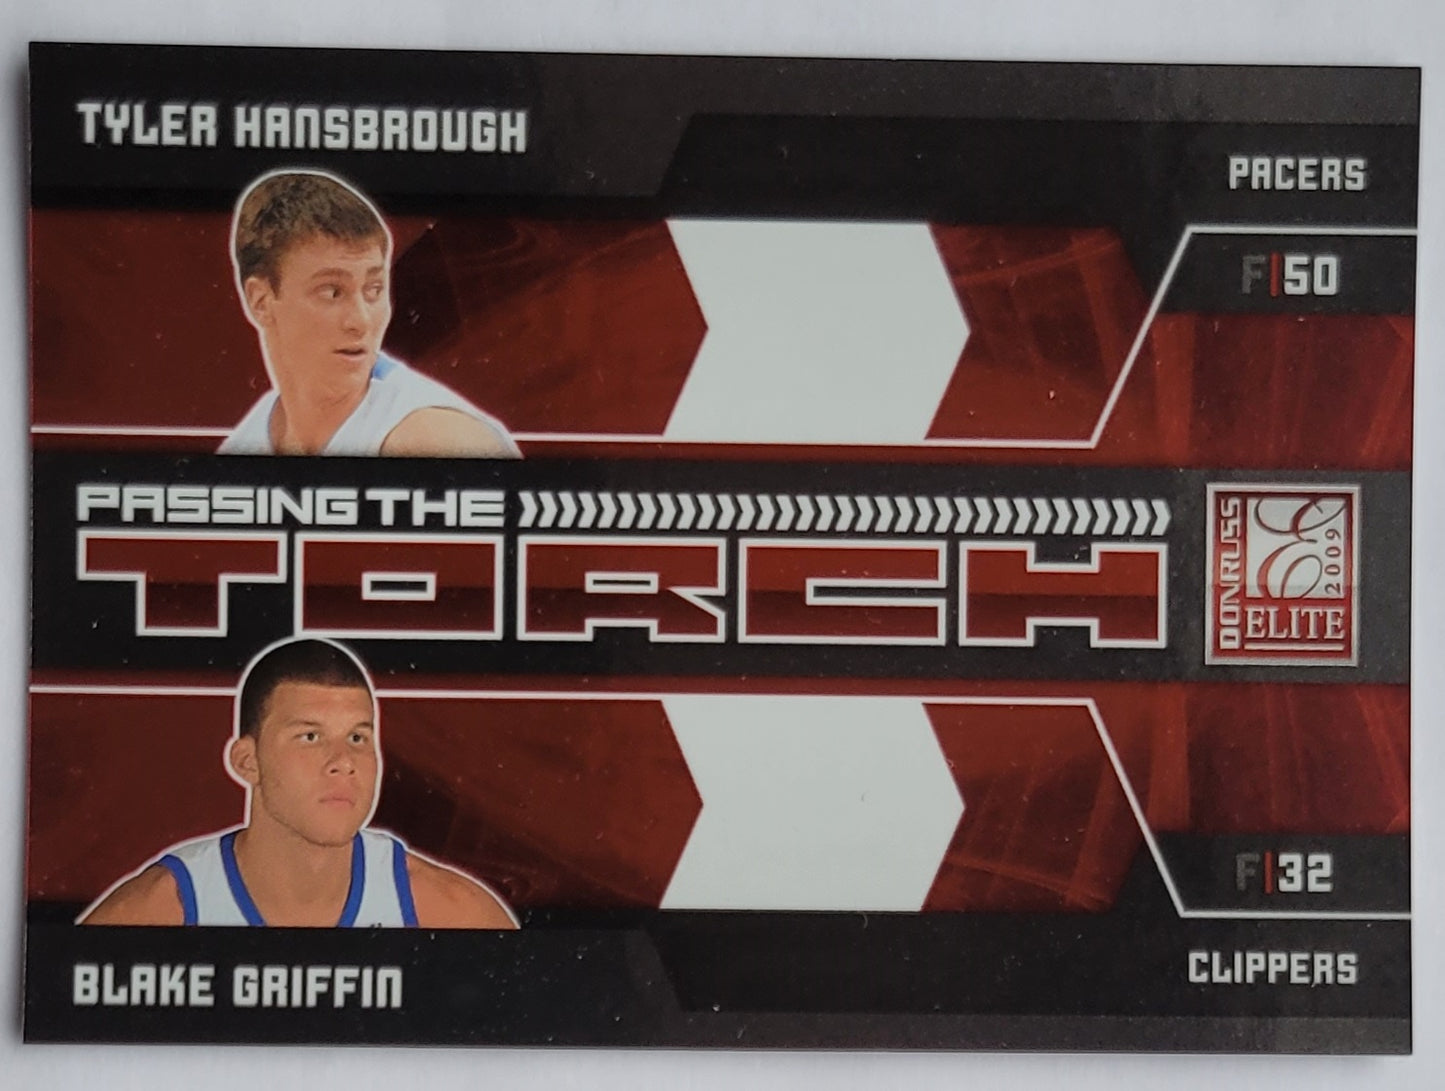 Tyler Hansbrough / Blake Griffin - 2009-10 Donruss Elite Passing the Torch Red #11 - 137/249